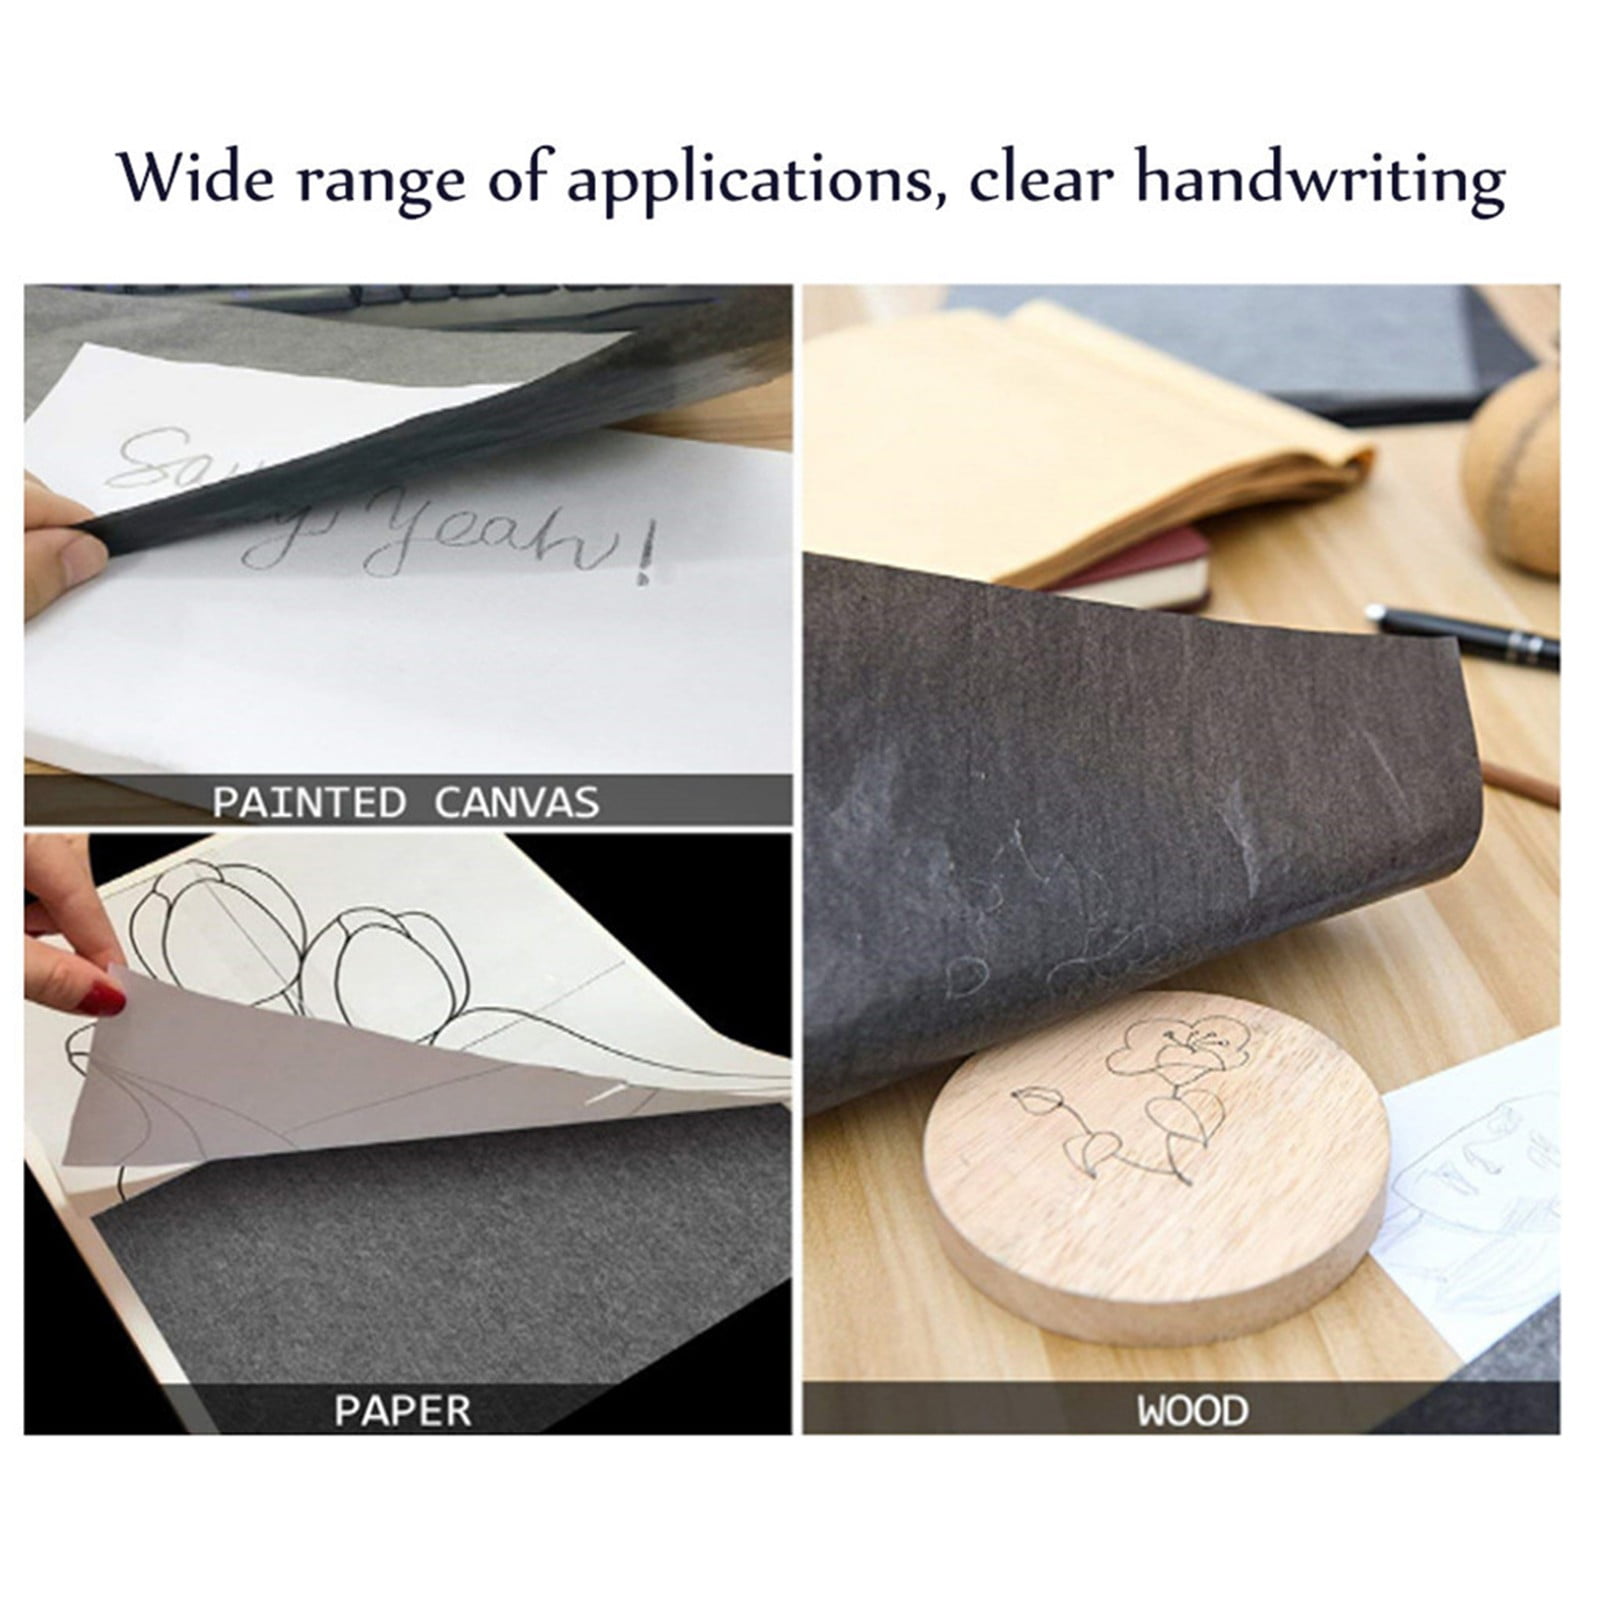 120 Sheets Carbon Transfer Paper 11.7”x8.3” Carbon Paper with 5 Tracing  Stylus for Wood Burning Transfer, Wood Carving,Trace Pattern